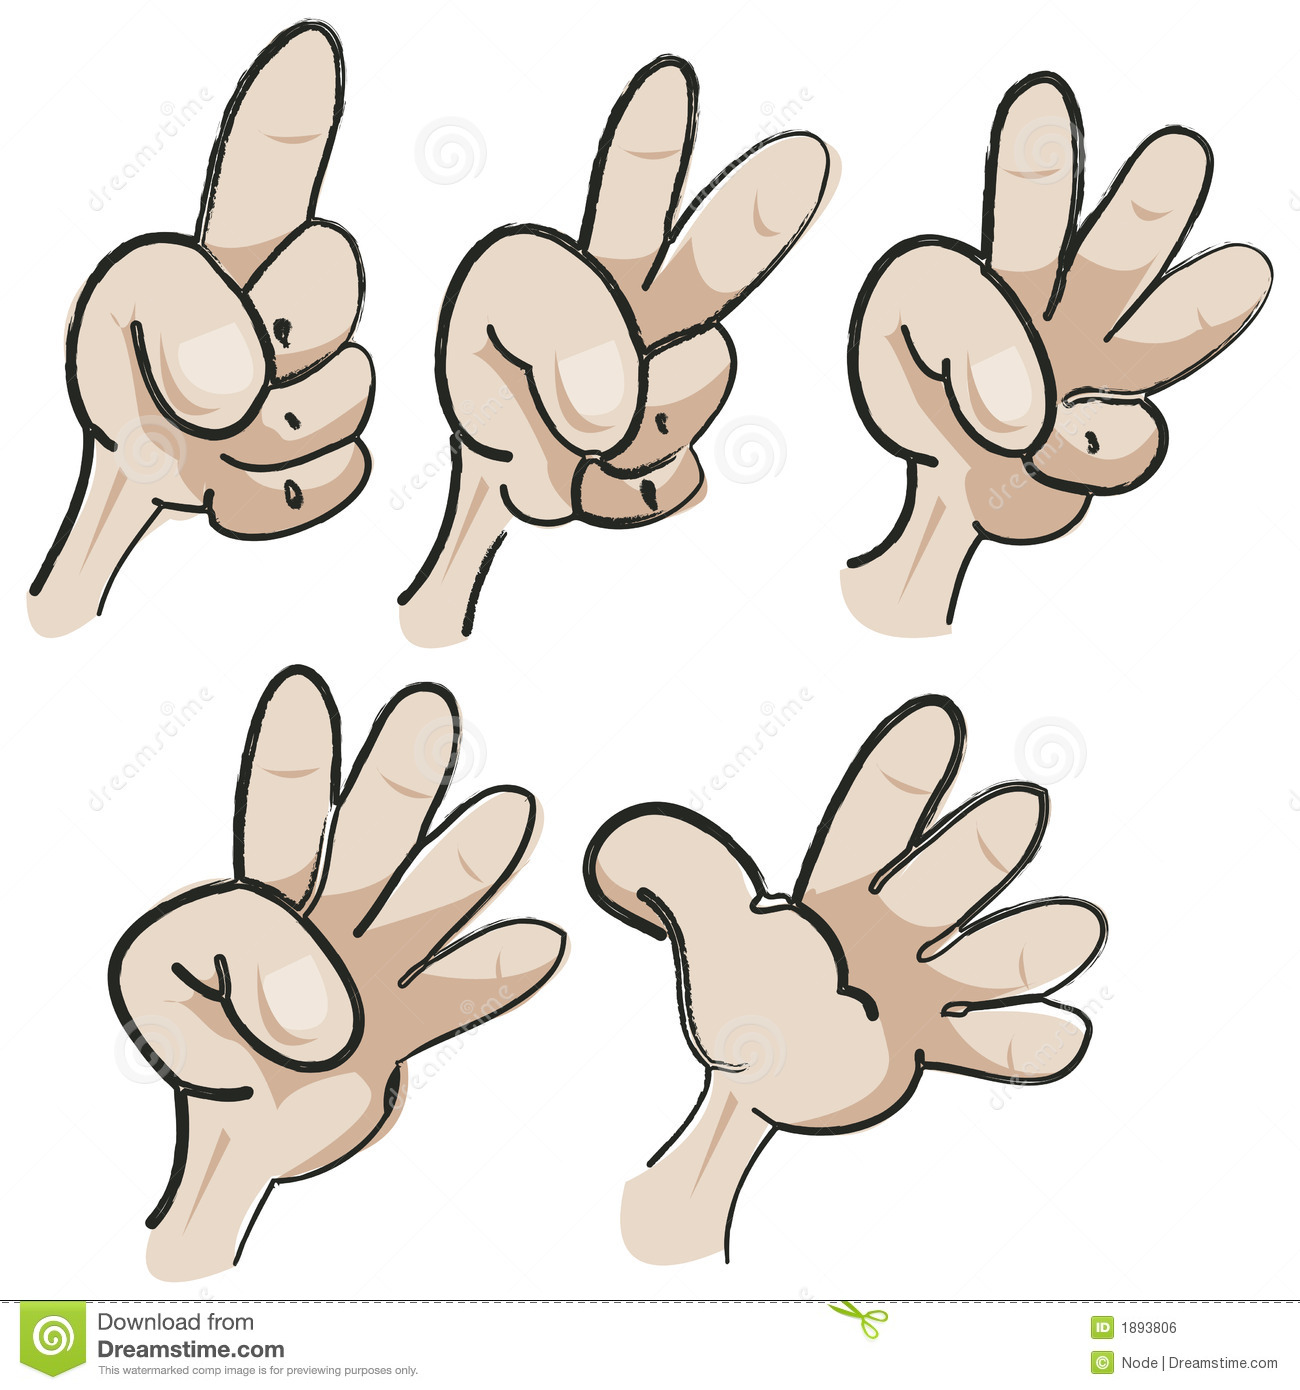 Illustration Of Five Hands Counting